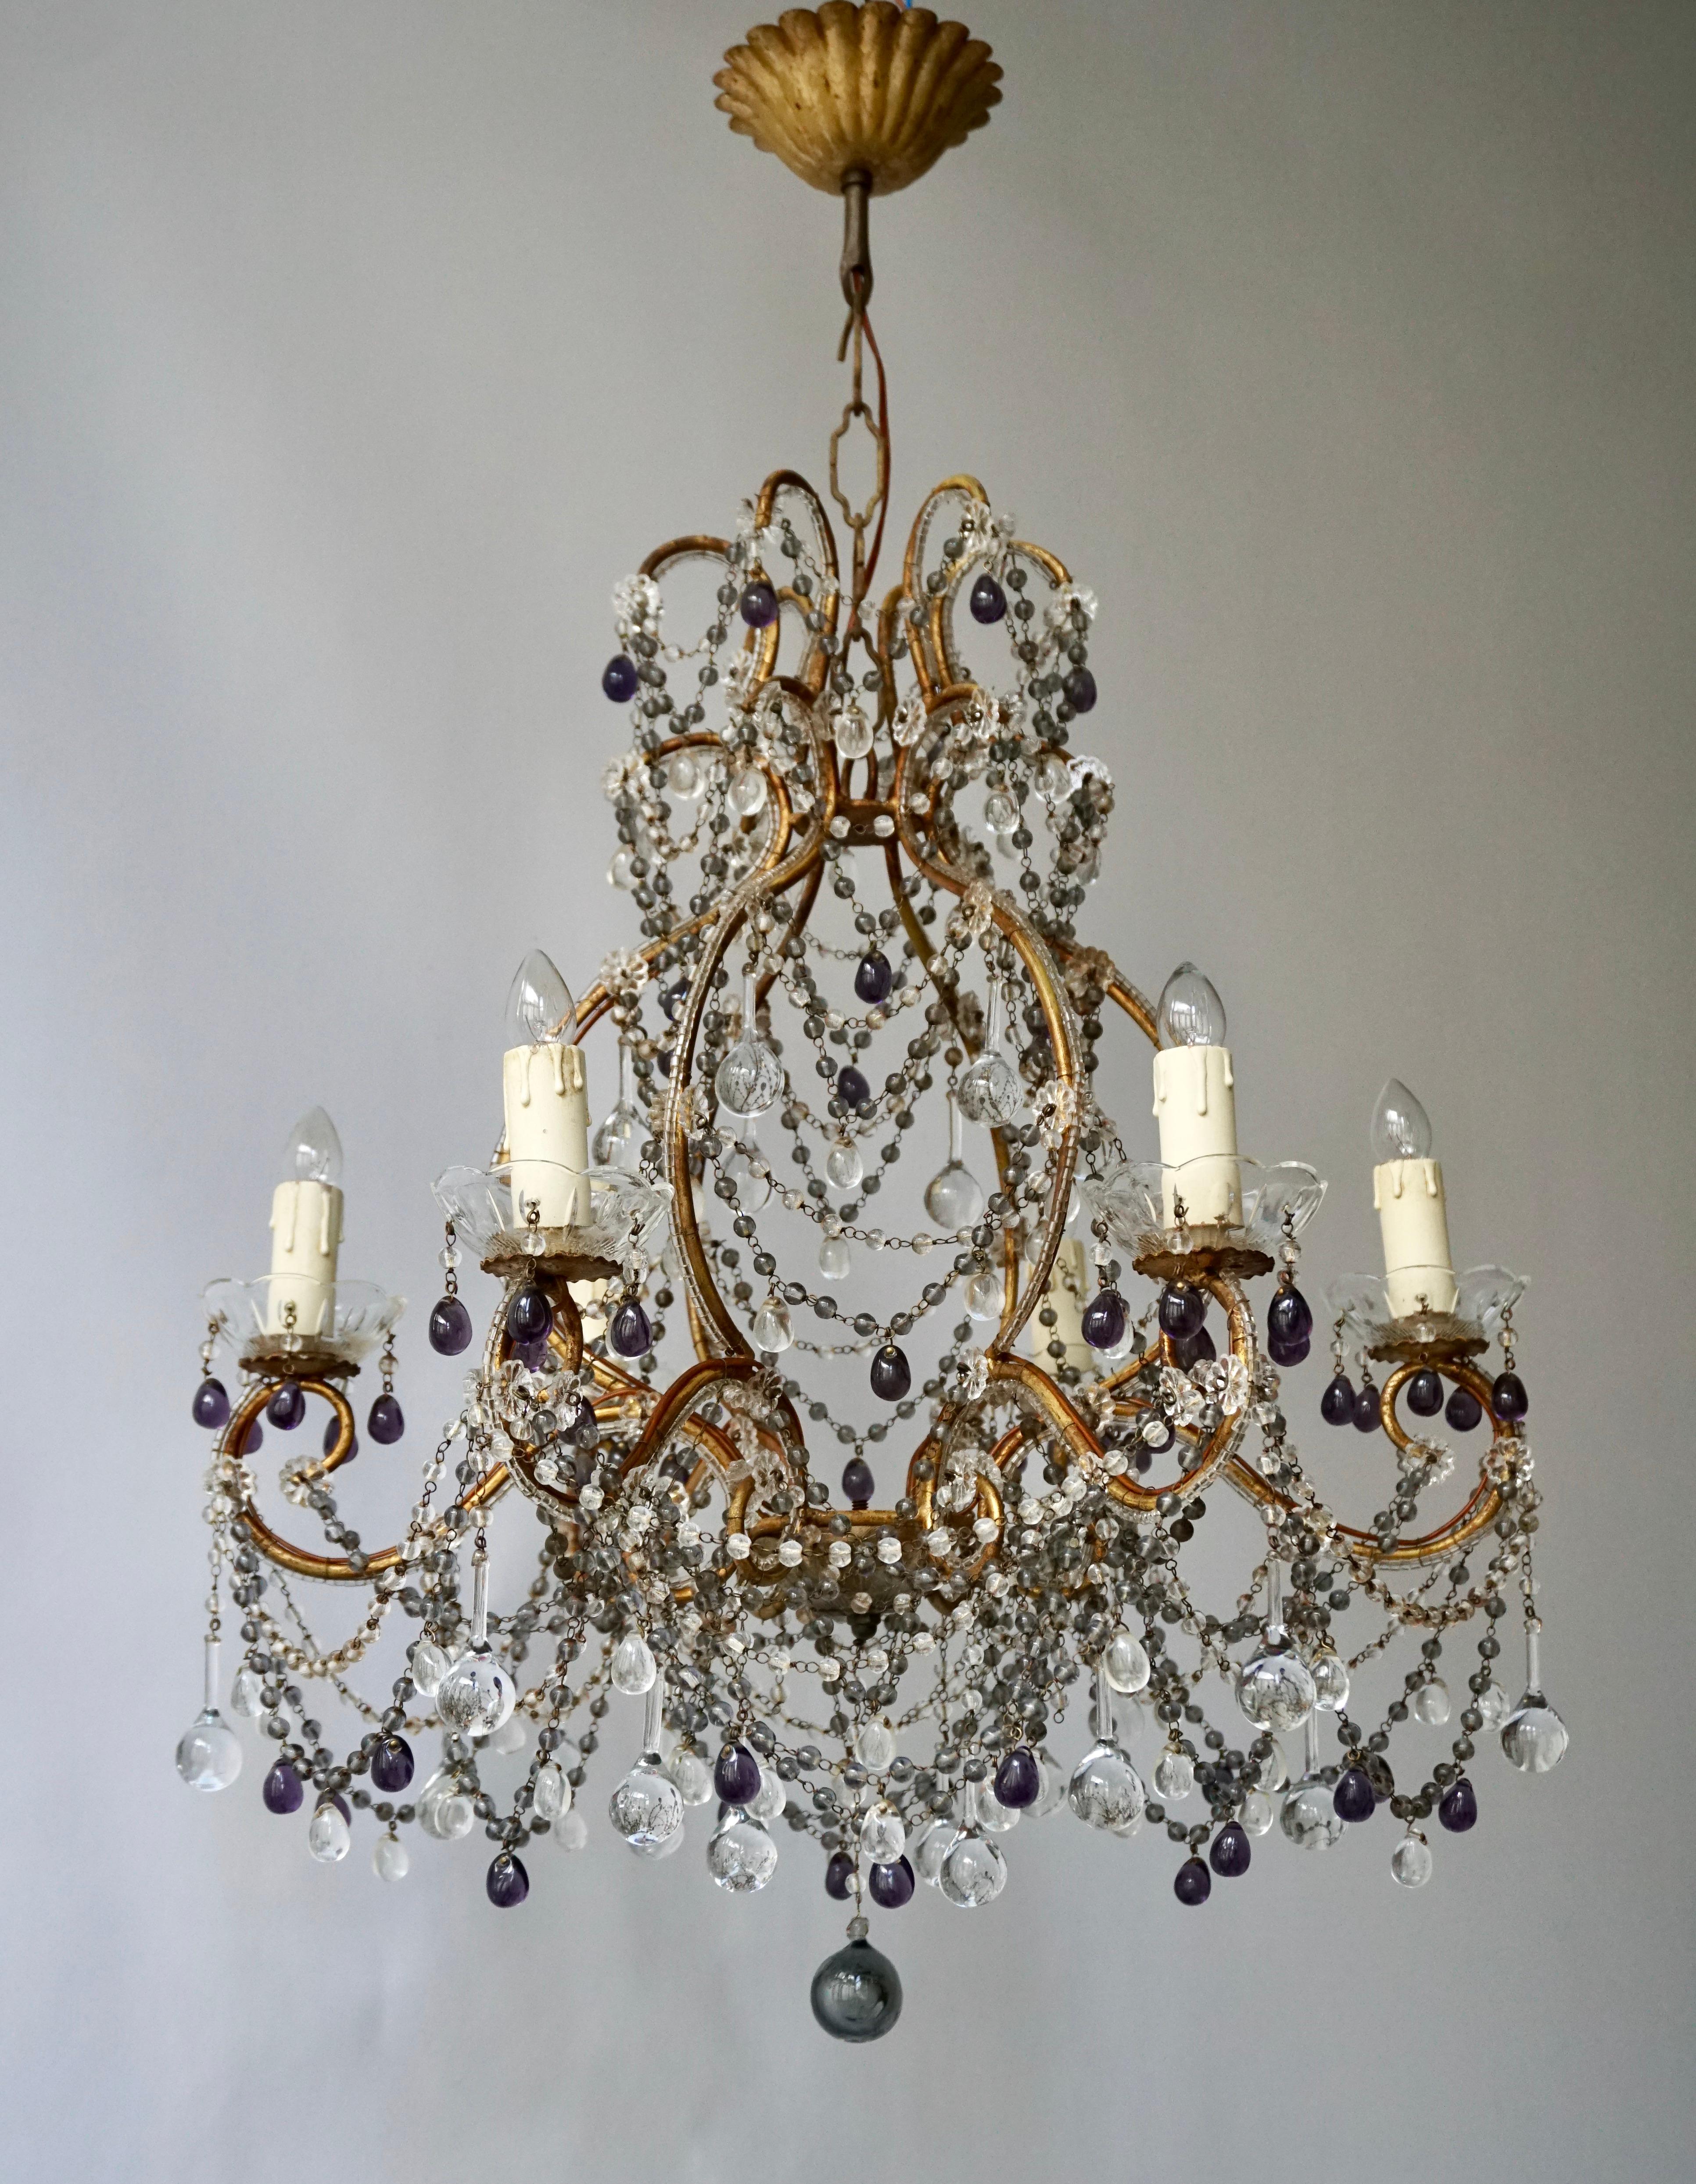 French Victorian 20th century 6-light crystal chandelier with purple and transparent glass.
Measures: Diameter 50 cm.
Height fixture 60 cm.
Total height including the chain and canopy 80 cm.